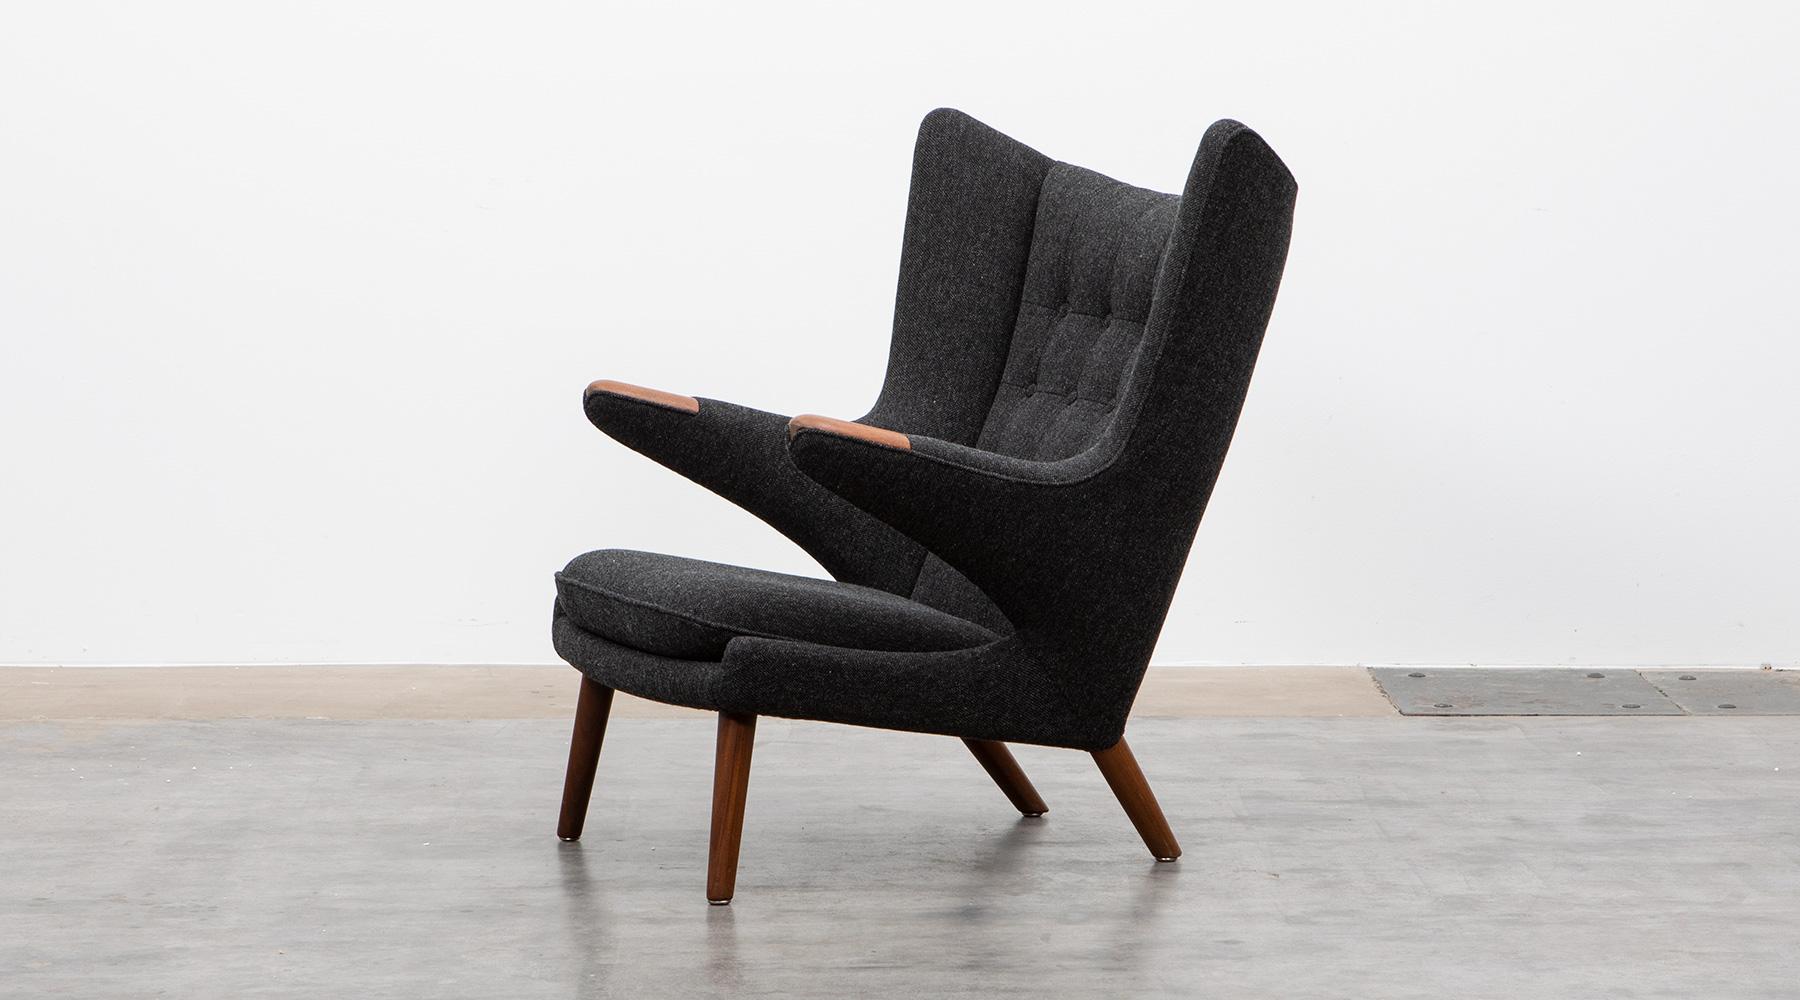 Papa Bear chair by Hans Wegner manufactured by A.P. Stolen, Denmark, 1951

Wonderful original Papa Bear chair designed by Hans Wegner. This ingenious piece comes in perfect condition, recently new upholstery with high-qualitiy woolen fabric in warm